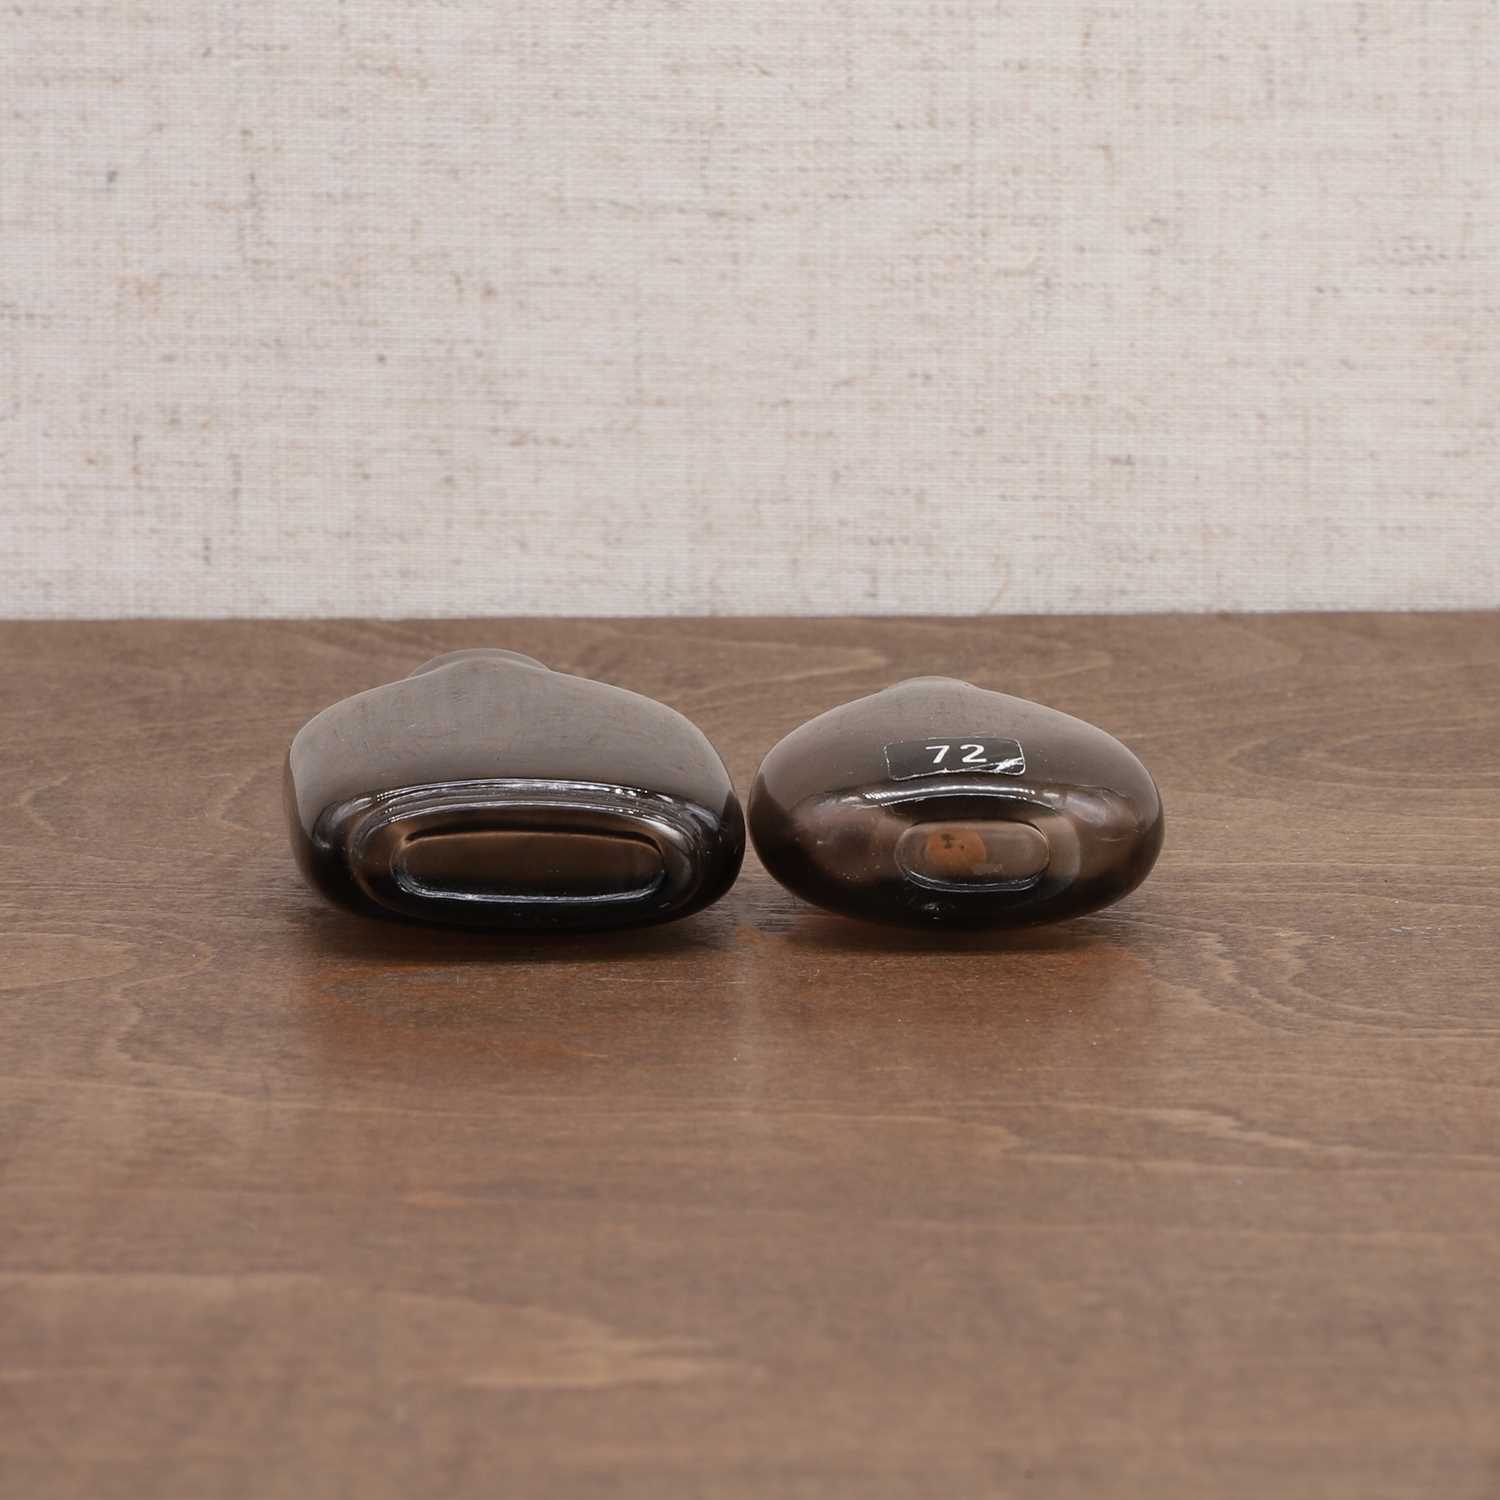 Two Chinese smoky quartz snuff bottles, - Image 7 of 7